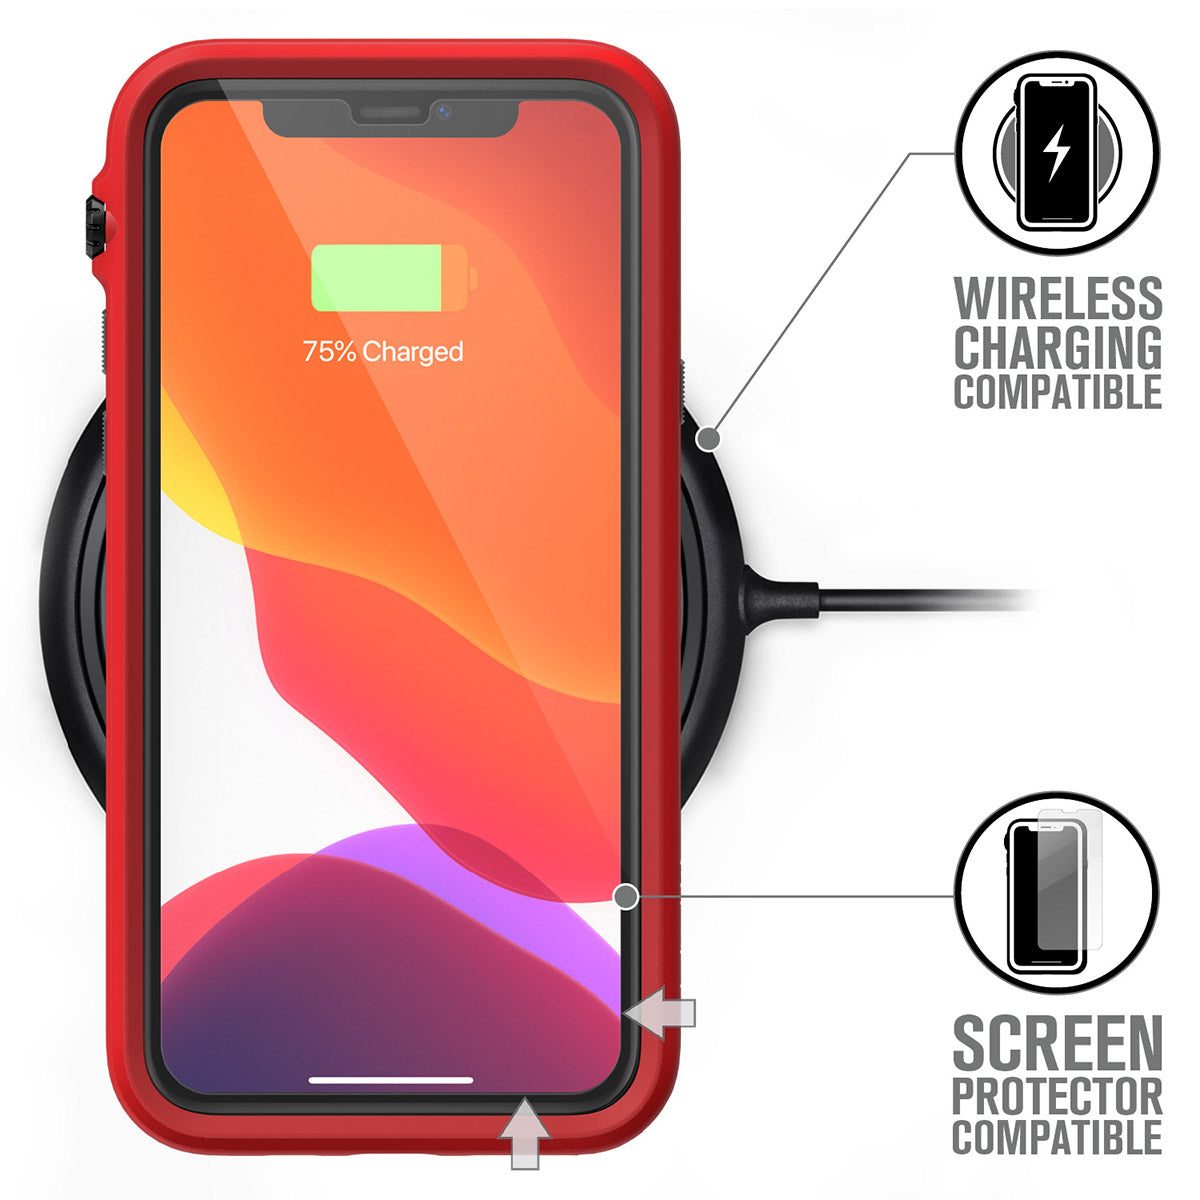 catalyst iPhone 11 series impact protection case for iphone 11 pro flame red placed on the wireless charger 75% charged text reads wireless charging compatible screen protector compatible